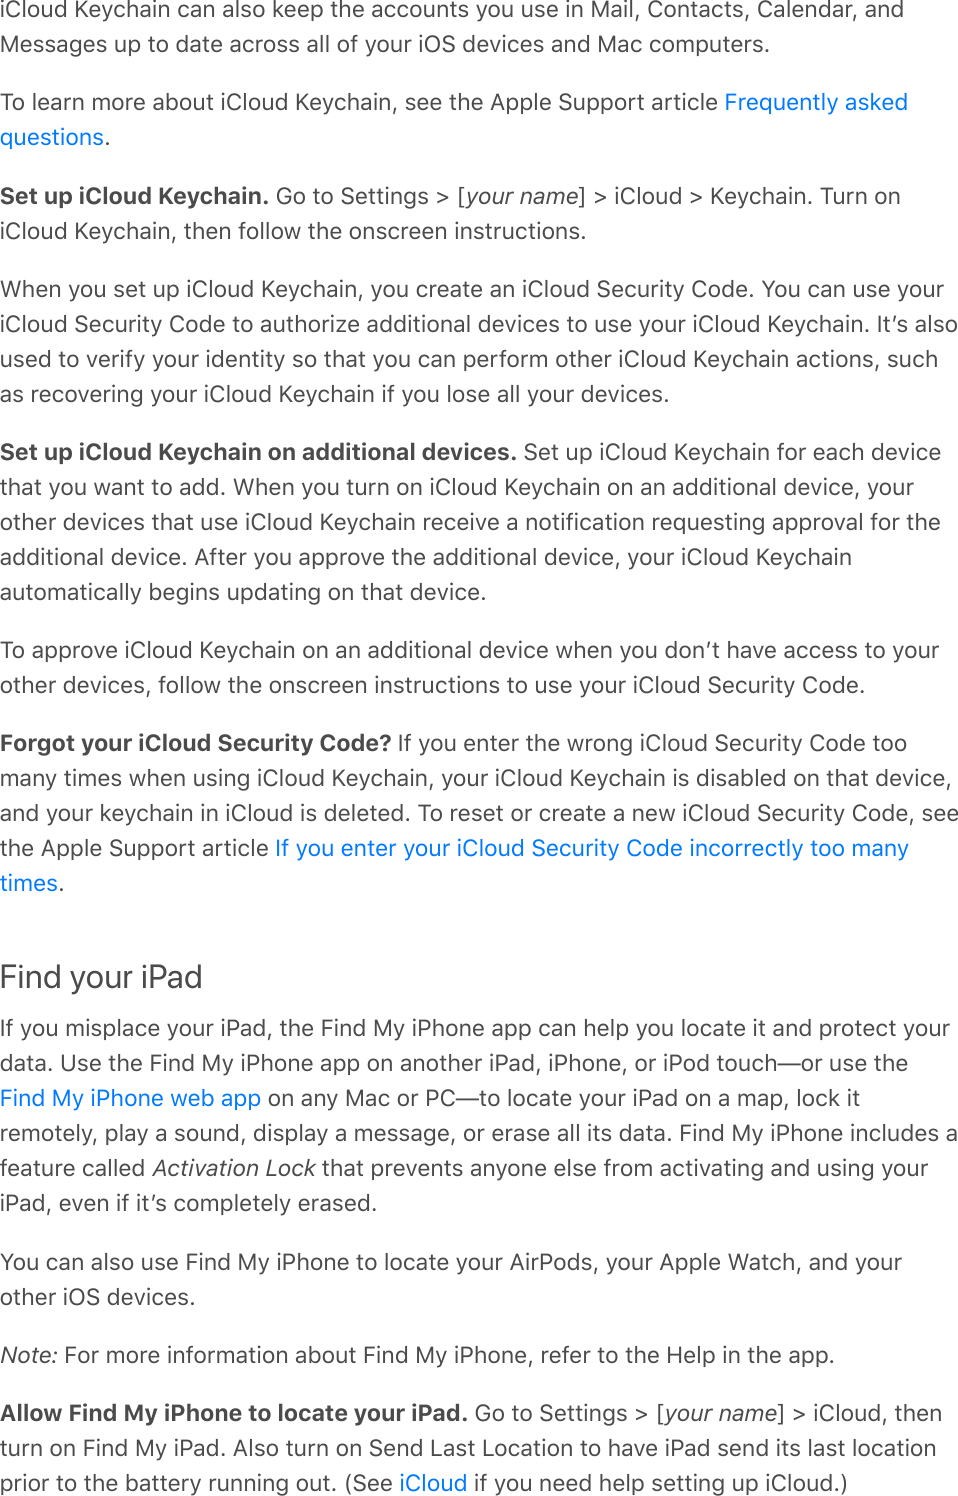 iCloud Keychain can also keep the accounts you use in Mail, Contacts, Calendar, andMessages up to date across all of your iOS devices and Mac computers.To learn more about iCloud Keychain, see the Apple Support article .Set up iCloud Keychain. Go to Settings &gt; [your name] &gt; iCloud &gt; Keychain. Turn oniCloud Keychain, then follow the onscreen instructions.When you set up iCloud Keychain, you create an iCloud Security Code. You can use youriCloud Security Code to authorize additional devices to use your iCloud Keychain. Itʼs alsoused to verify your identity so that you can perform other iCloud Keychain actions, suchas recovering your iCloud Keychain if you lose all your devices.Set up iCloud Keychain on additional devices. Set up iCloud Keychain for each devicethat you want to add. When you turn on iCloud Keychain on an additional device, yourother devices that use iCloud Keychain receive a notification requesting approval for theadditional device. After you approve the additional device, your iCloud Keychainautomatically begins updating on that device.To approve iCloud Keychain on an additional device when you donʼt have access to yourother devices, follow the onscreen instructions to use your iCloud Security Code.Forgot your iCloud Security Code? If you enter the wrong iCloud Security Code toomany times when using iCloud Keychain, your iCloud Keychain is disabled on that device,and your keychain in iCloud is deleted. To reset or create a new iCloud Security Code, seethe Apple Support article .Find your iPadIf you misplace your iPad, the Find My iPhone app can help you locate it and protect yourdata. Use the Find My iPhone app on another iPad, iPhone, or iPod touch—or use the on any Mac or PC—to locate your iPad on a map, lock itremotely, play a sound, display a message, or erase all its data. Find My iPhone includes afeature called Activation Lock that prevents anyone else from activating and using youriPad, even if itʼs completely erased.You can also use Find My iPhone to locate your AirPods, your Apple Watch, and yourother iOS devices.Note: For more information about Find My iPhone, refer to the Help in the app.Allow Find My iPhone to locate your iPad. Go to Settings &gt; [your name] &gt; iCloud, thenturn on Find My iPad. Also turn on Send Last Location to have iPad send its last locationprior to the battery running out. (See   if you need help setting up iCloud.)Frequently askedquestionsIf you enter your iCloud Security Code incorrectly too manytimesFind My iPhone web appiCloud